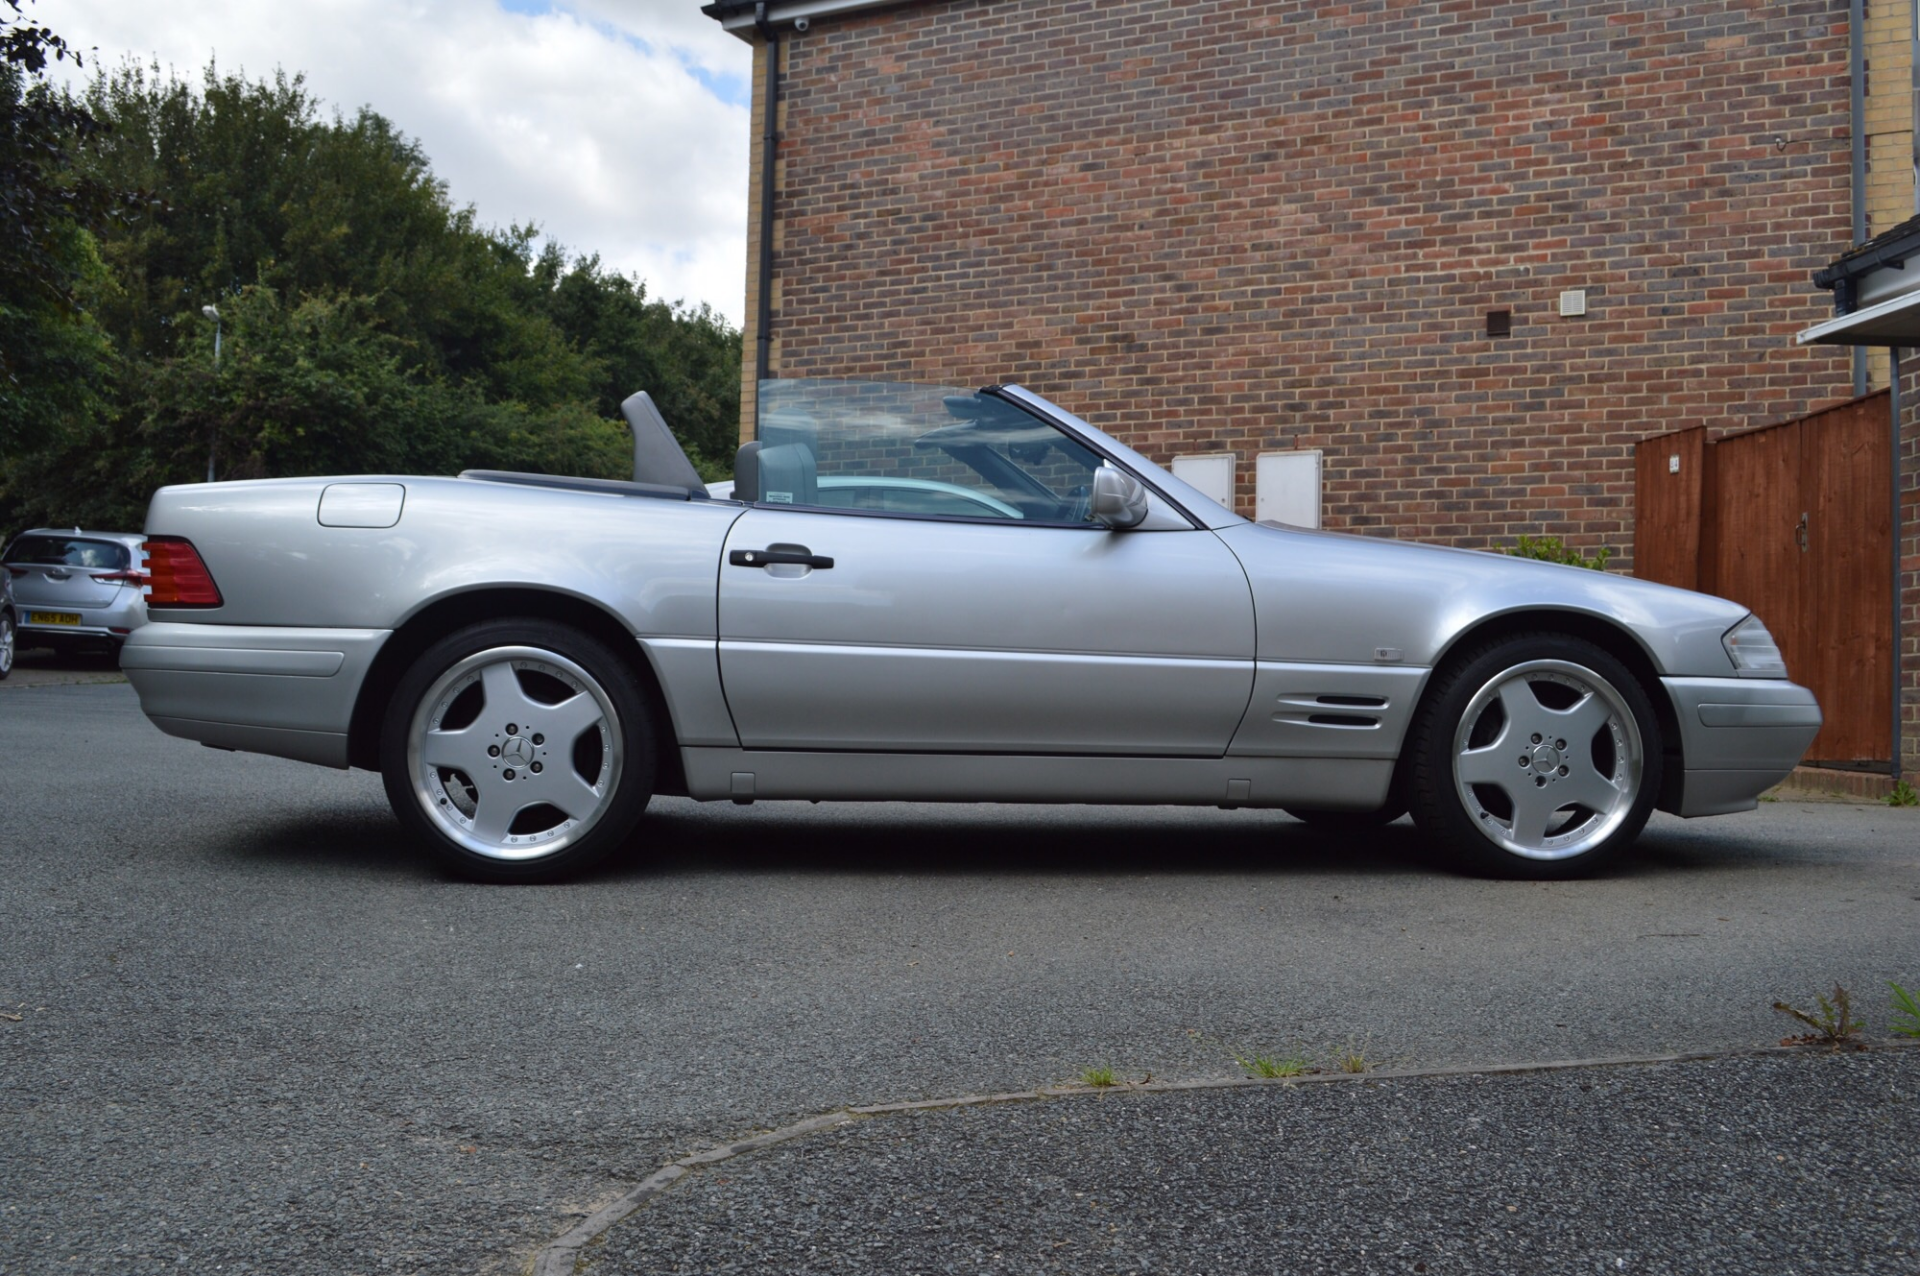 Mercedes Benz SL Class Automatic Sports Convertible (Hard and soft top) - Image 4 of 19